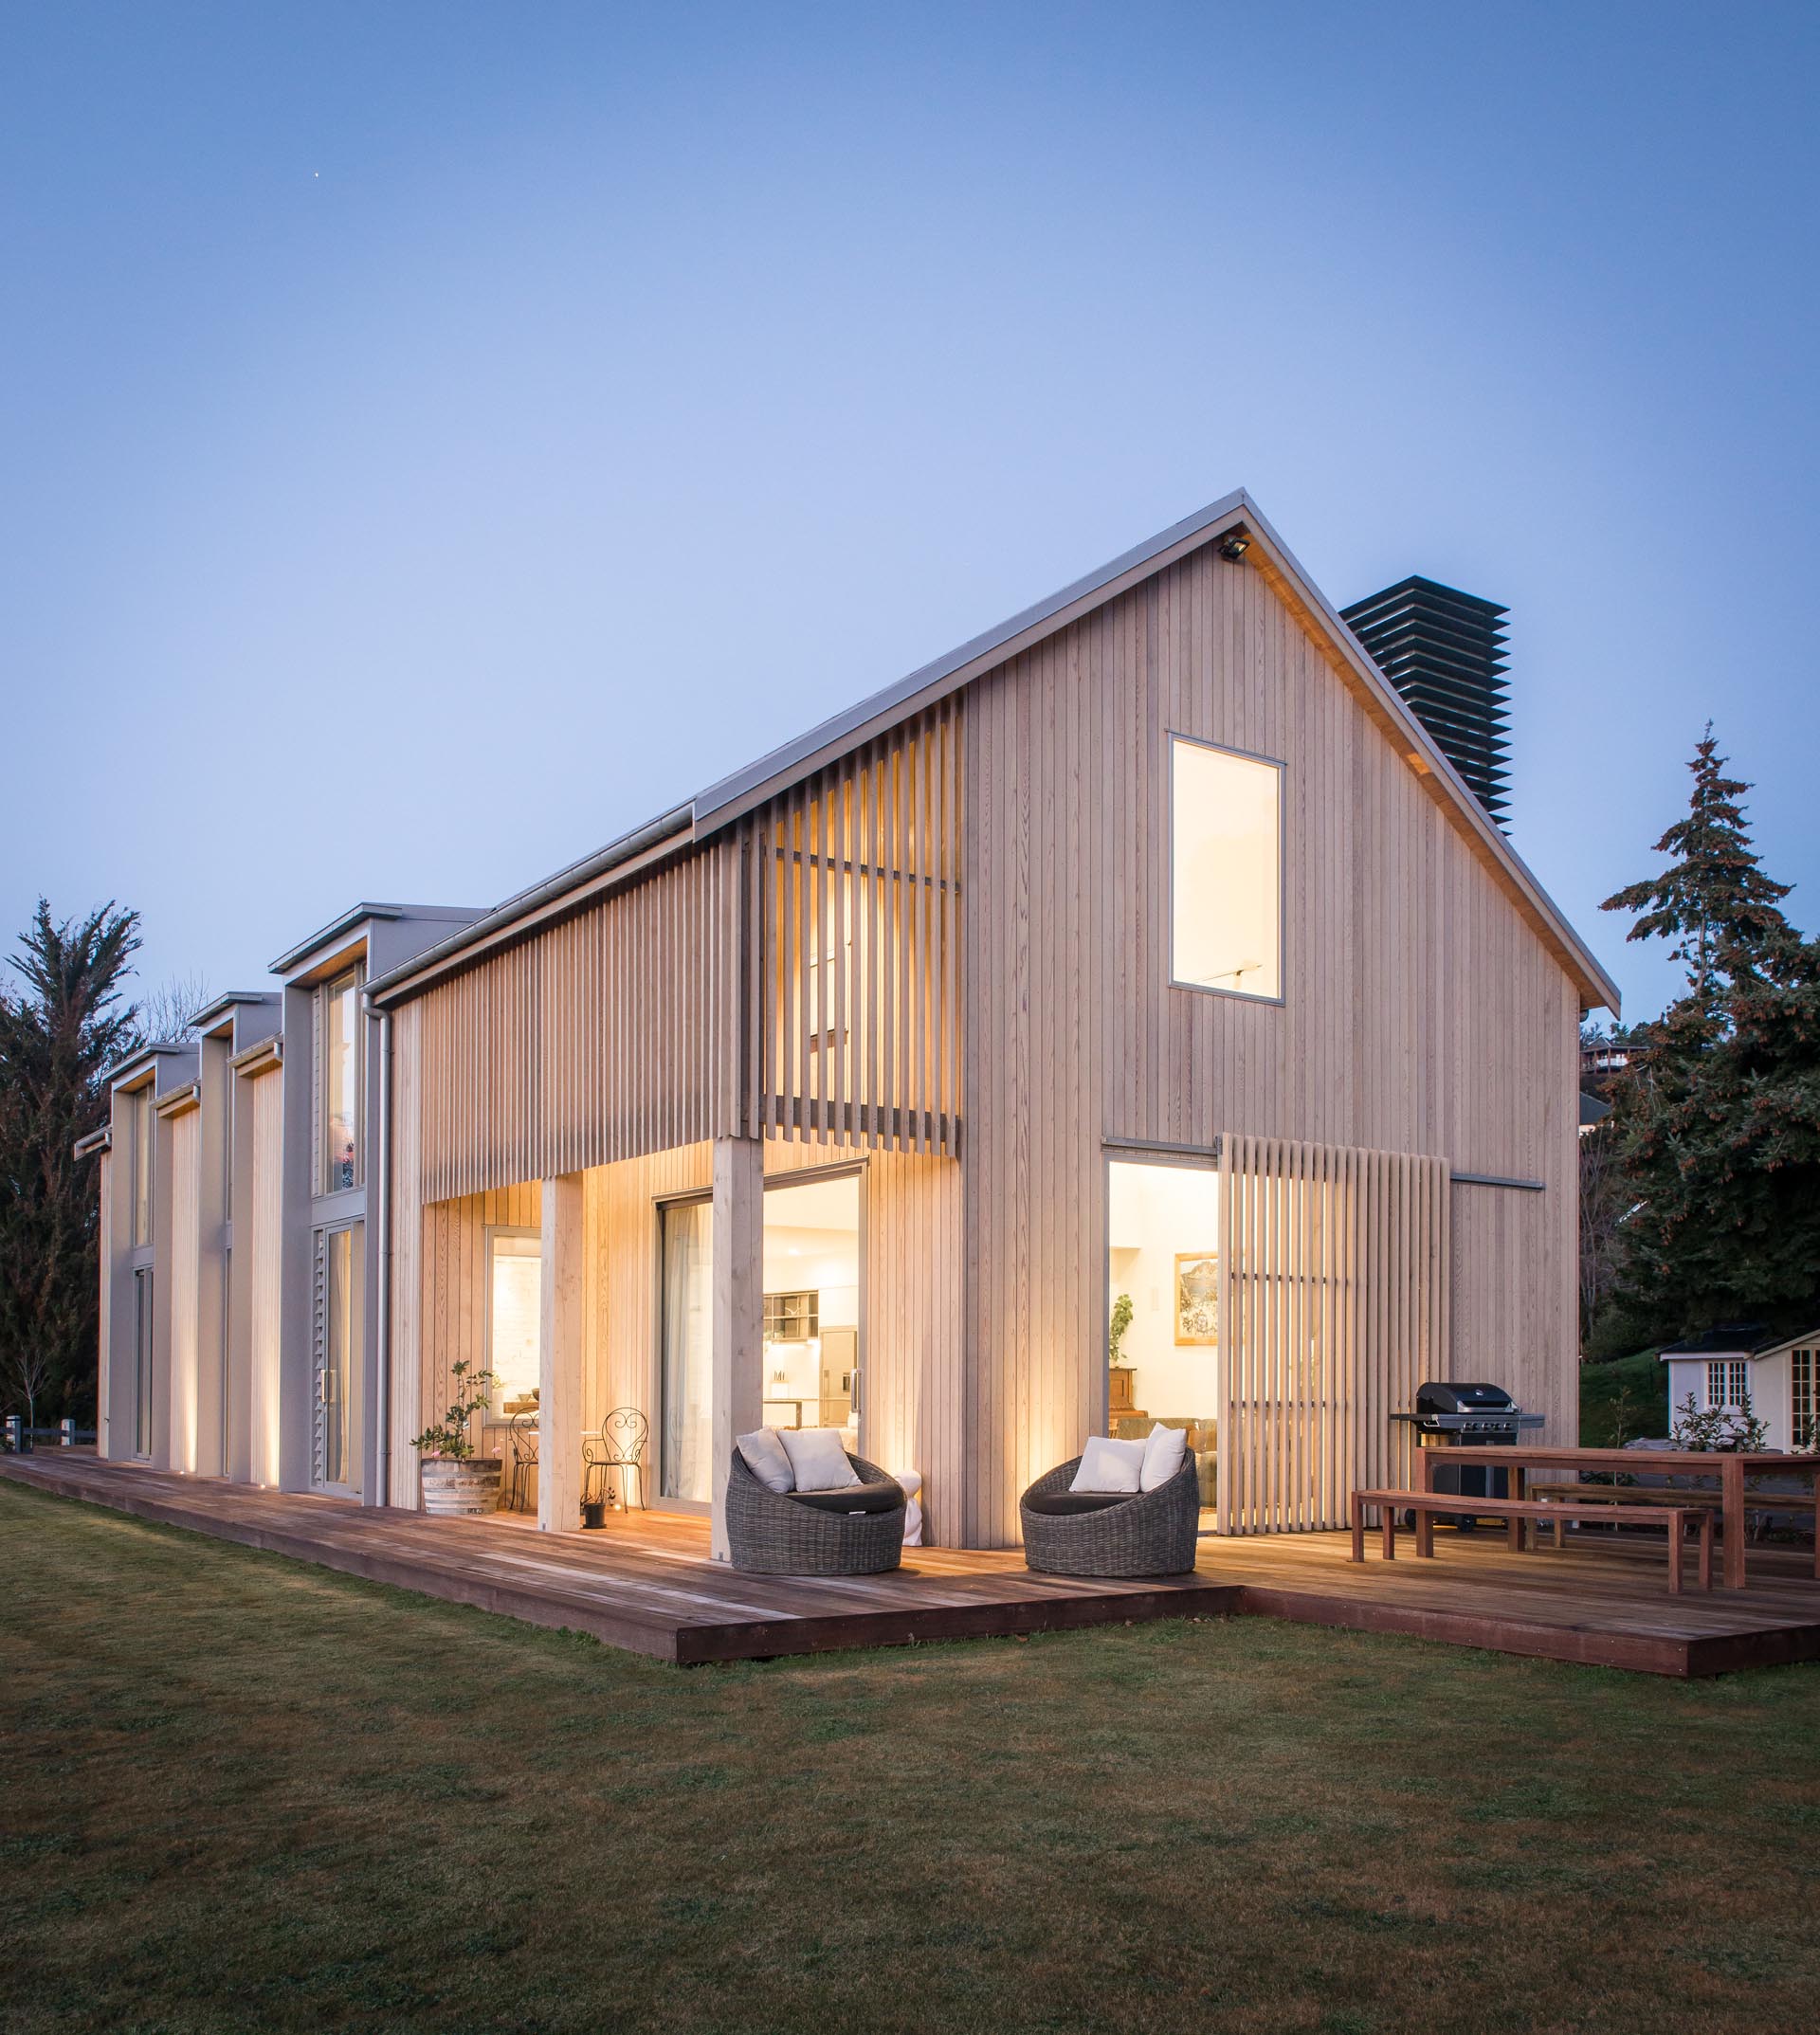 A contemporary barn-inspired home  with wood cladding and a wrap around deck.